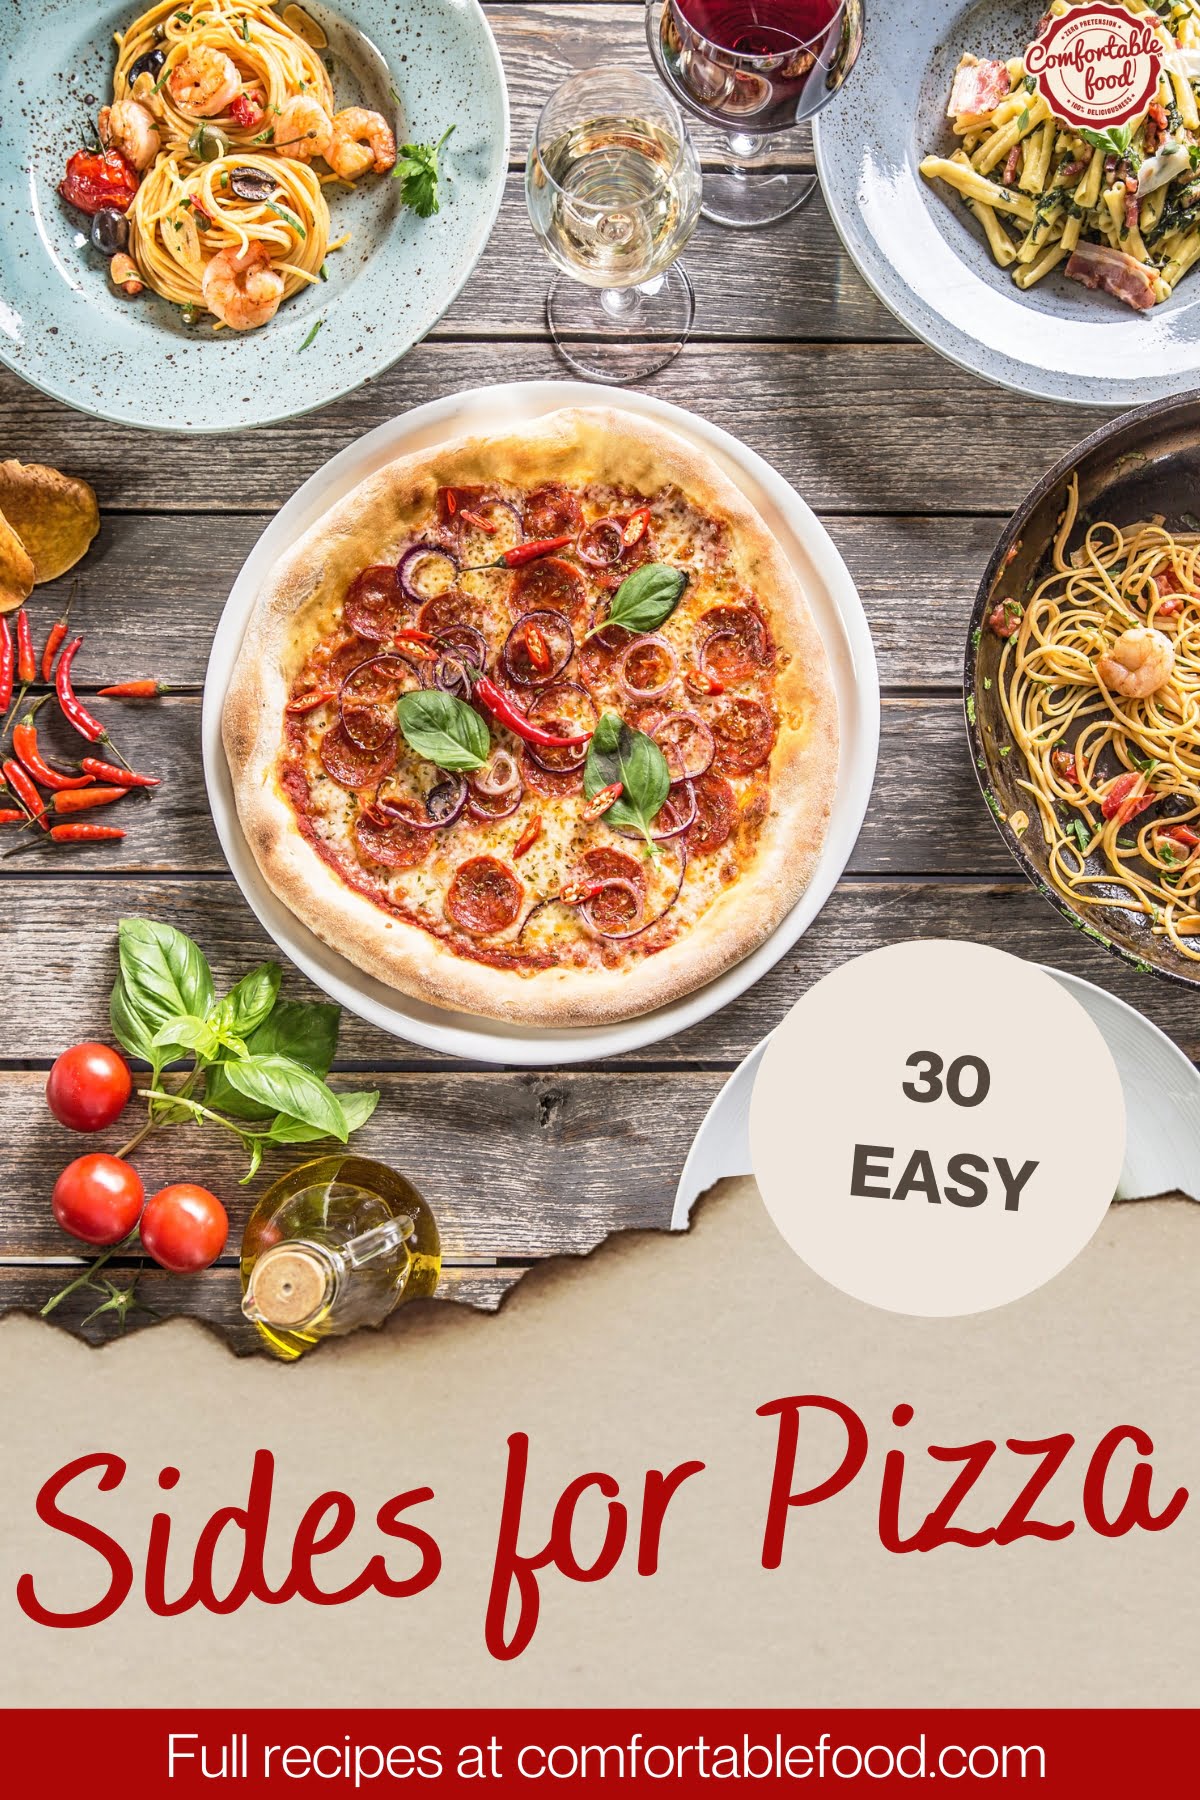 30 sides for pizza - socials